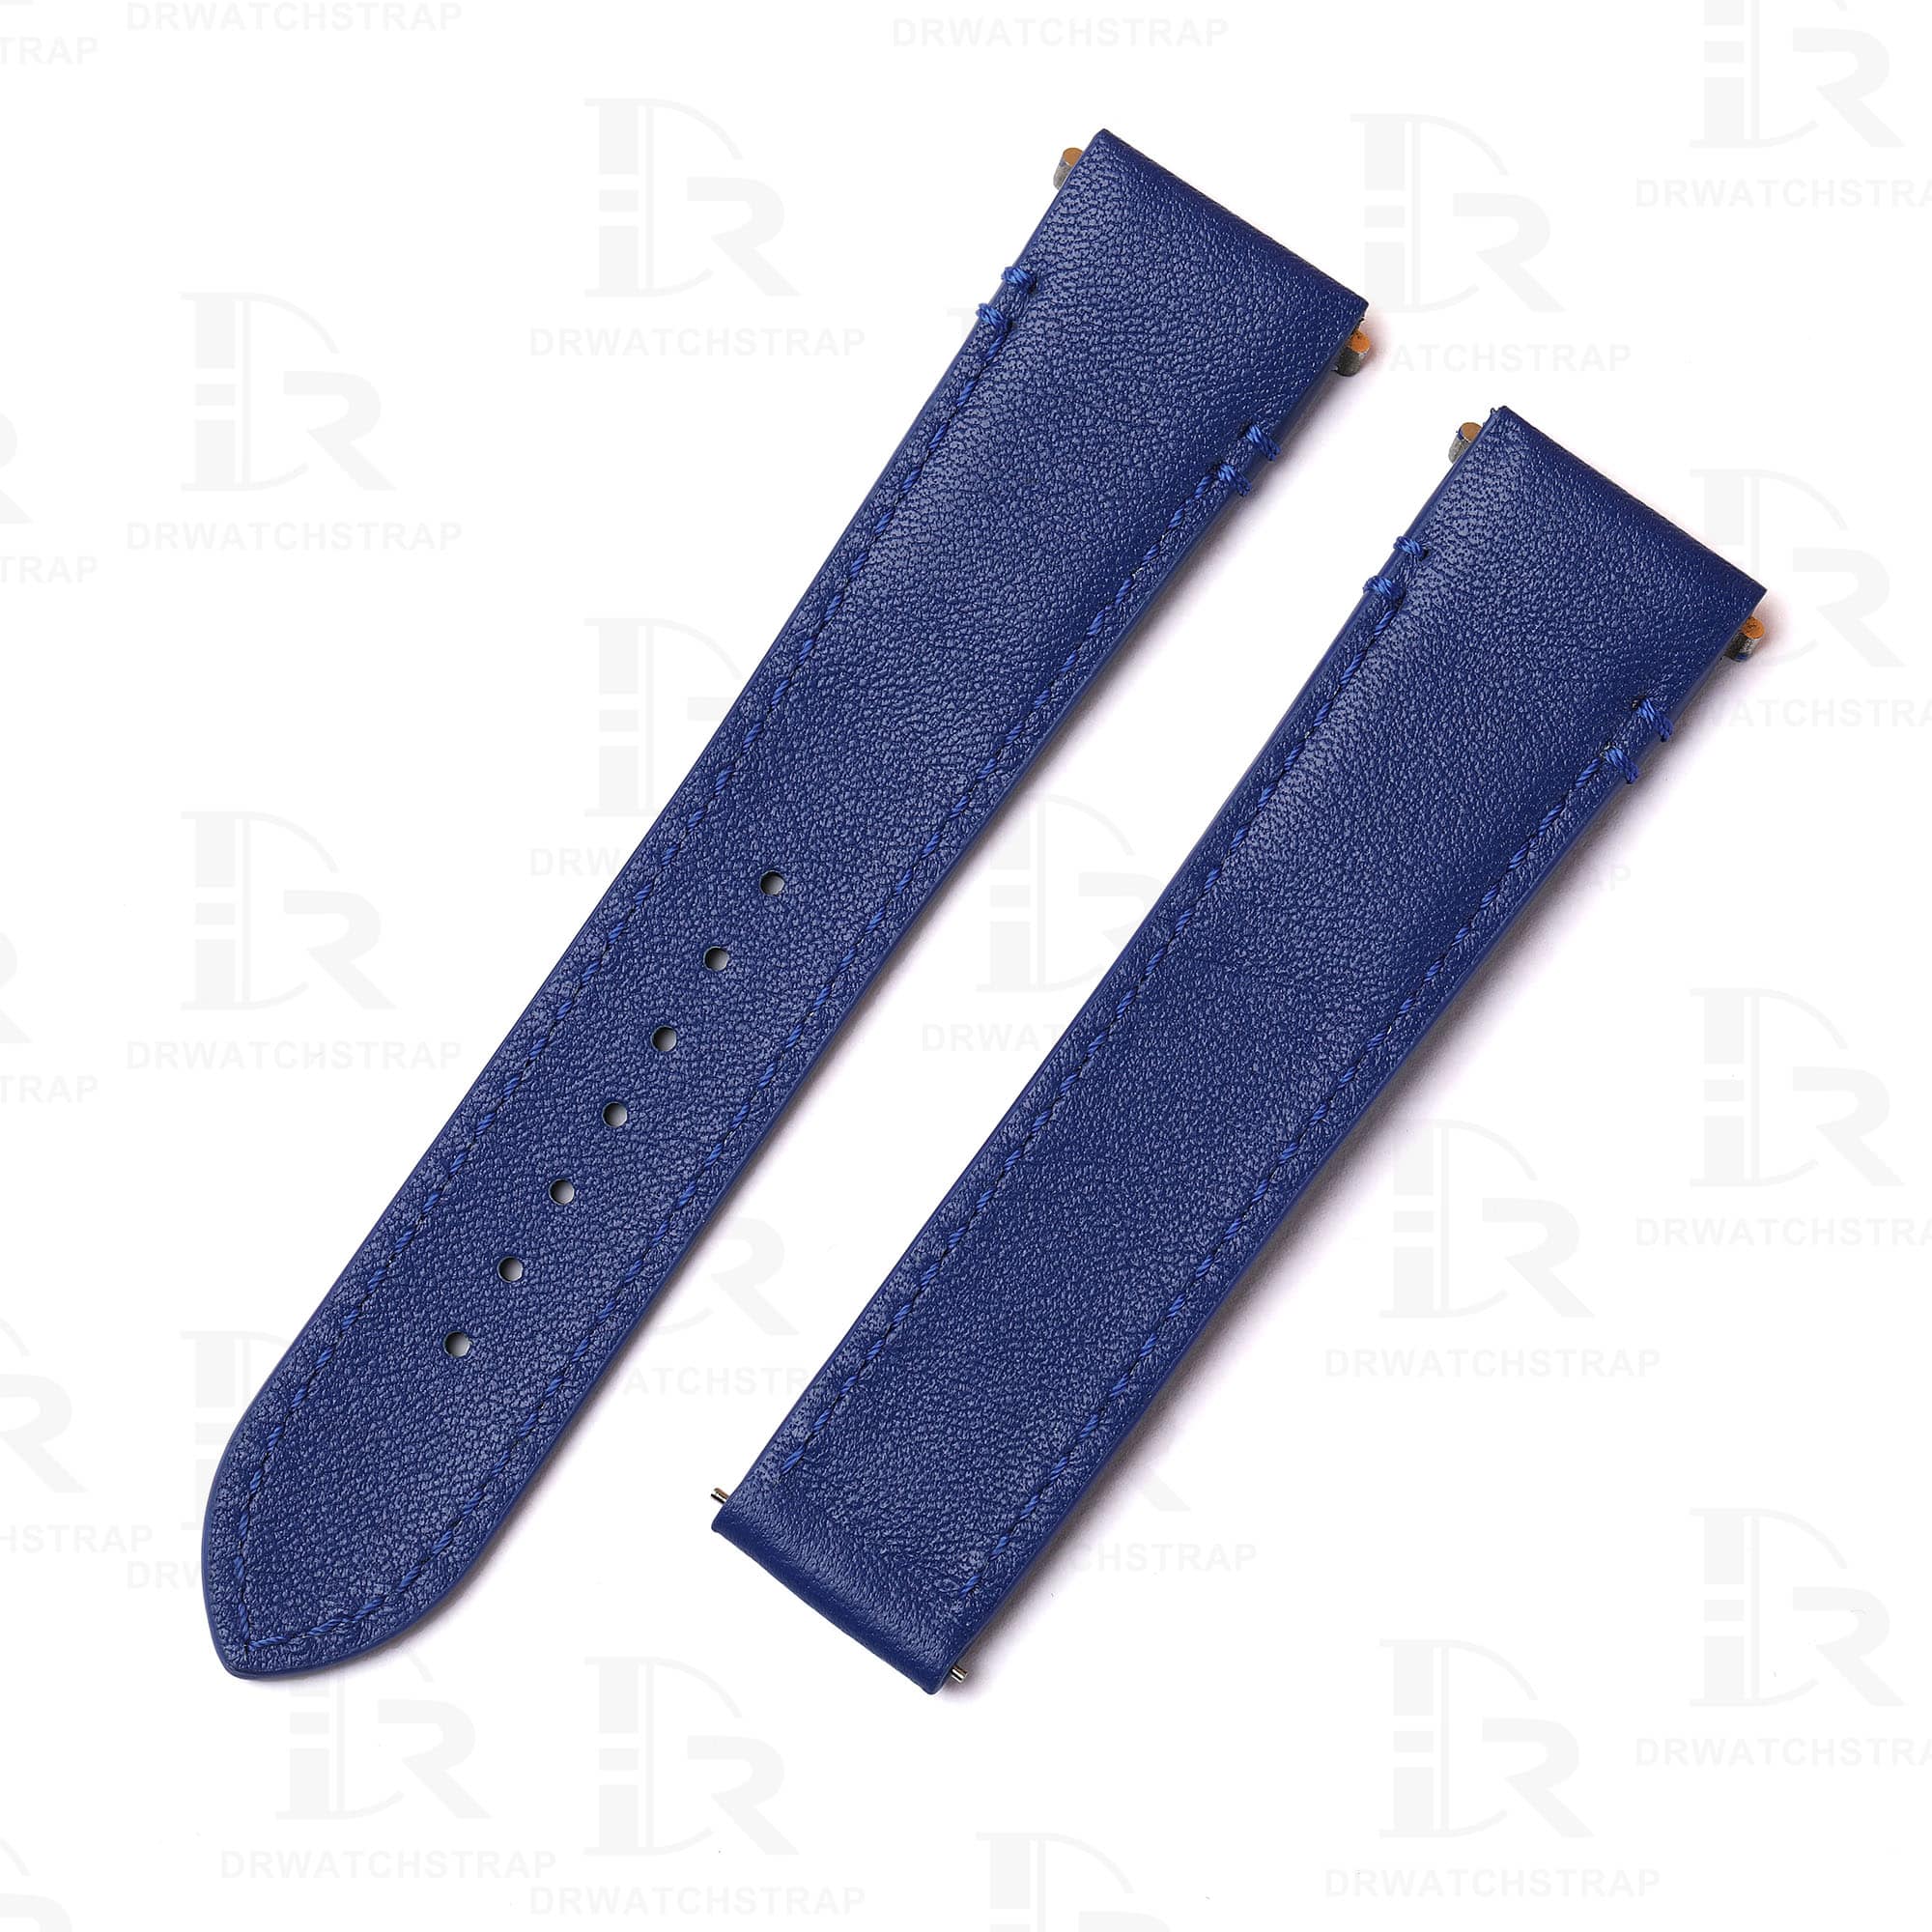 Quick release calfskin Cartier Santos quickswitch royal blue leather watch strap replacement with an interchangeable system leather watchbands for Cartier Santos Larga Medium watches.